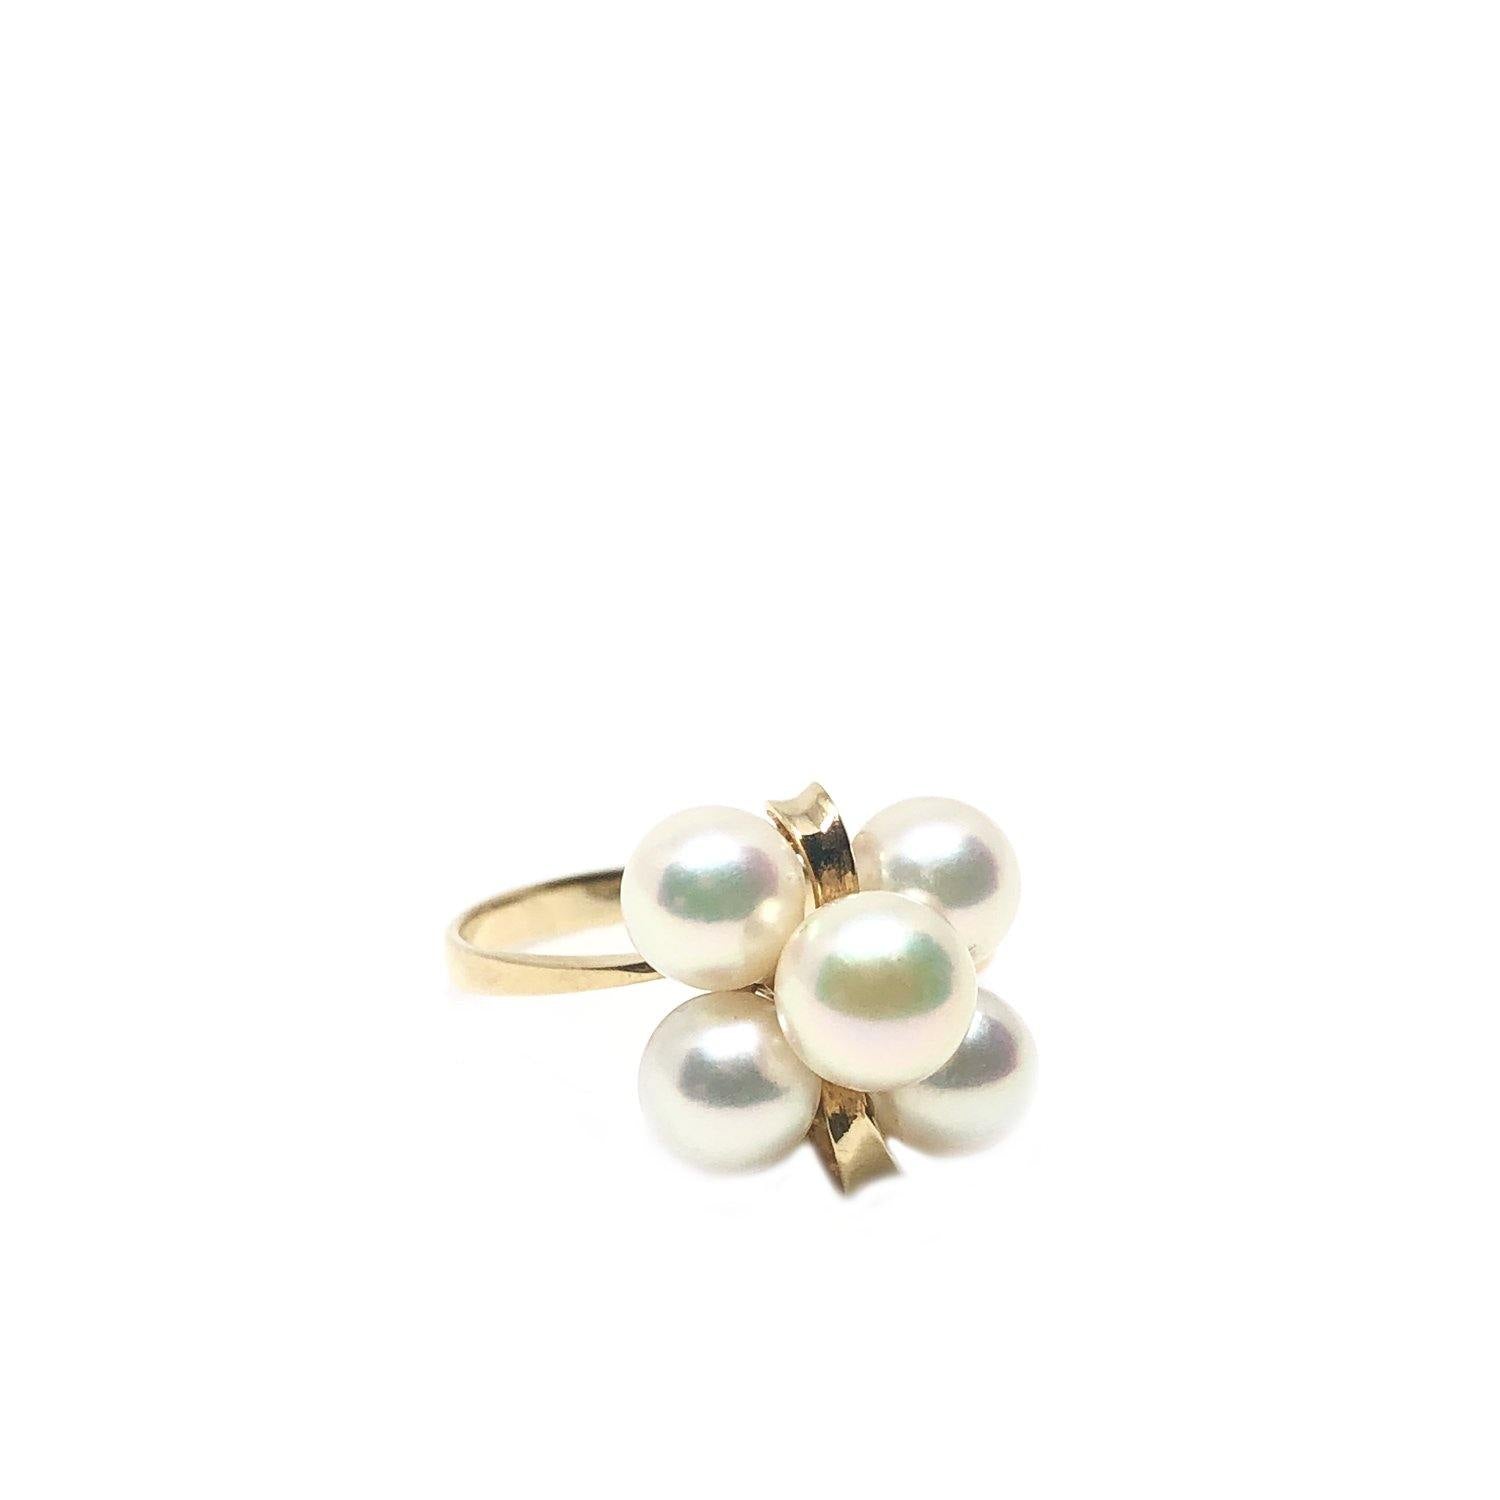 Retro Cluster Design Japanese Saltwater Akoya Cultured Pearl Ring- 18K Yellow Gold Size 6 3/4